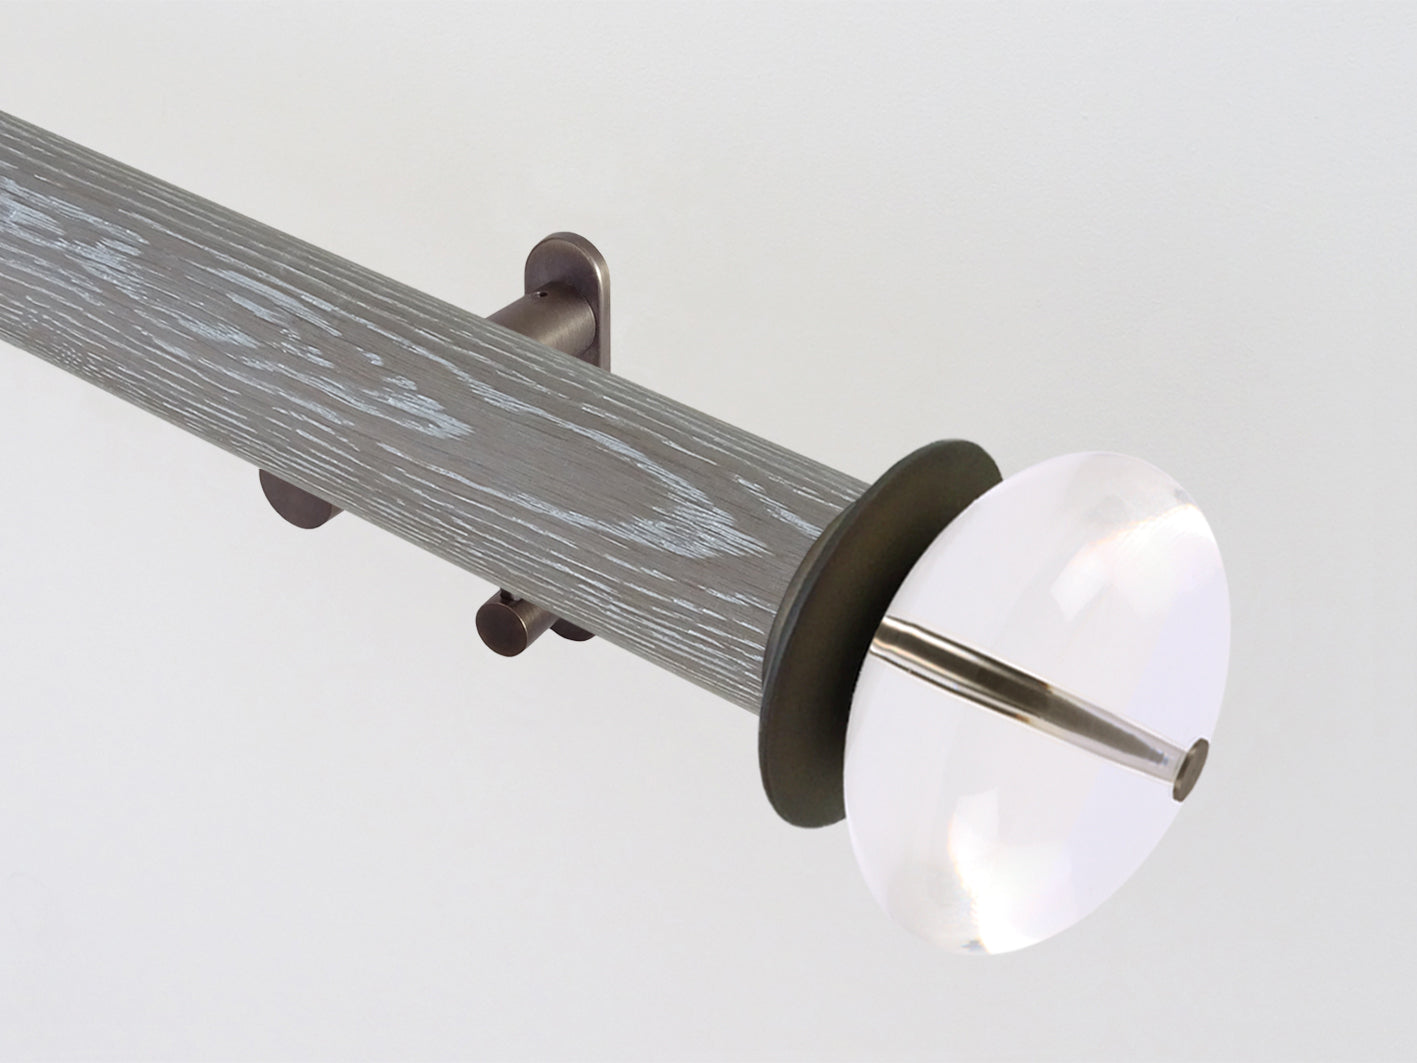 Designer real solid oak curtain pole set with clear perspex finials, 50mm diameter with integrated track | Walcot House